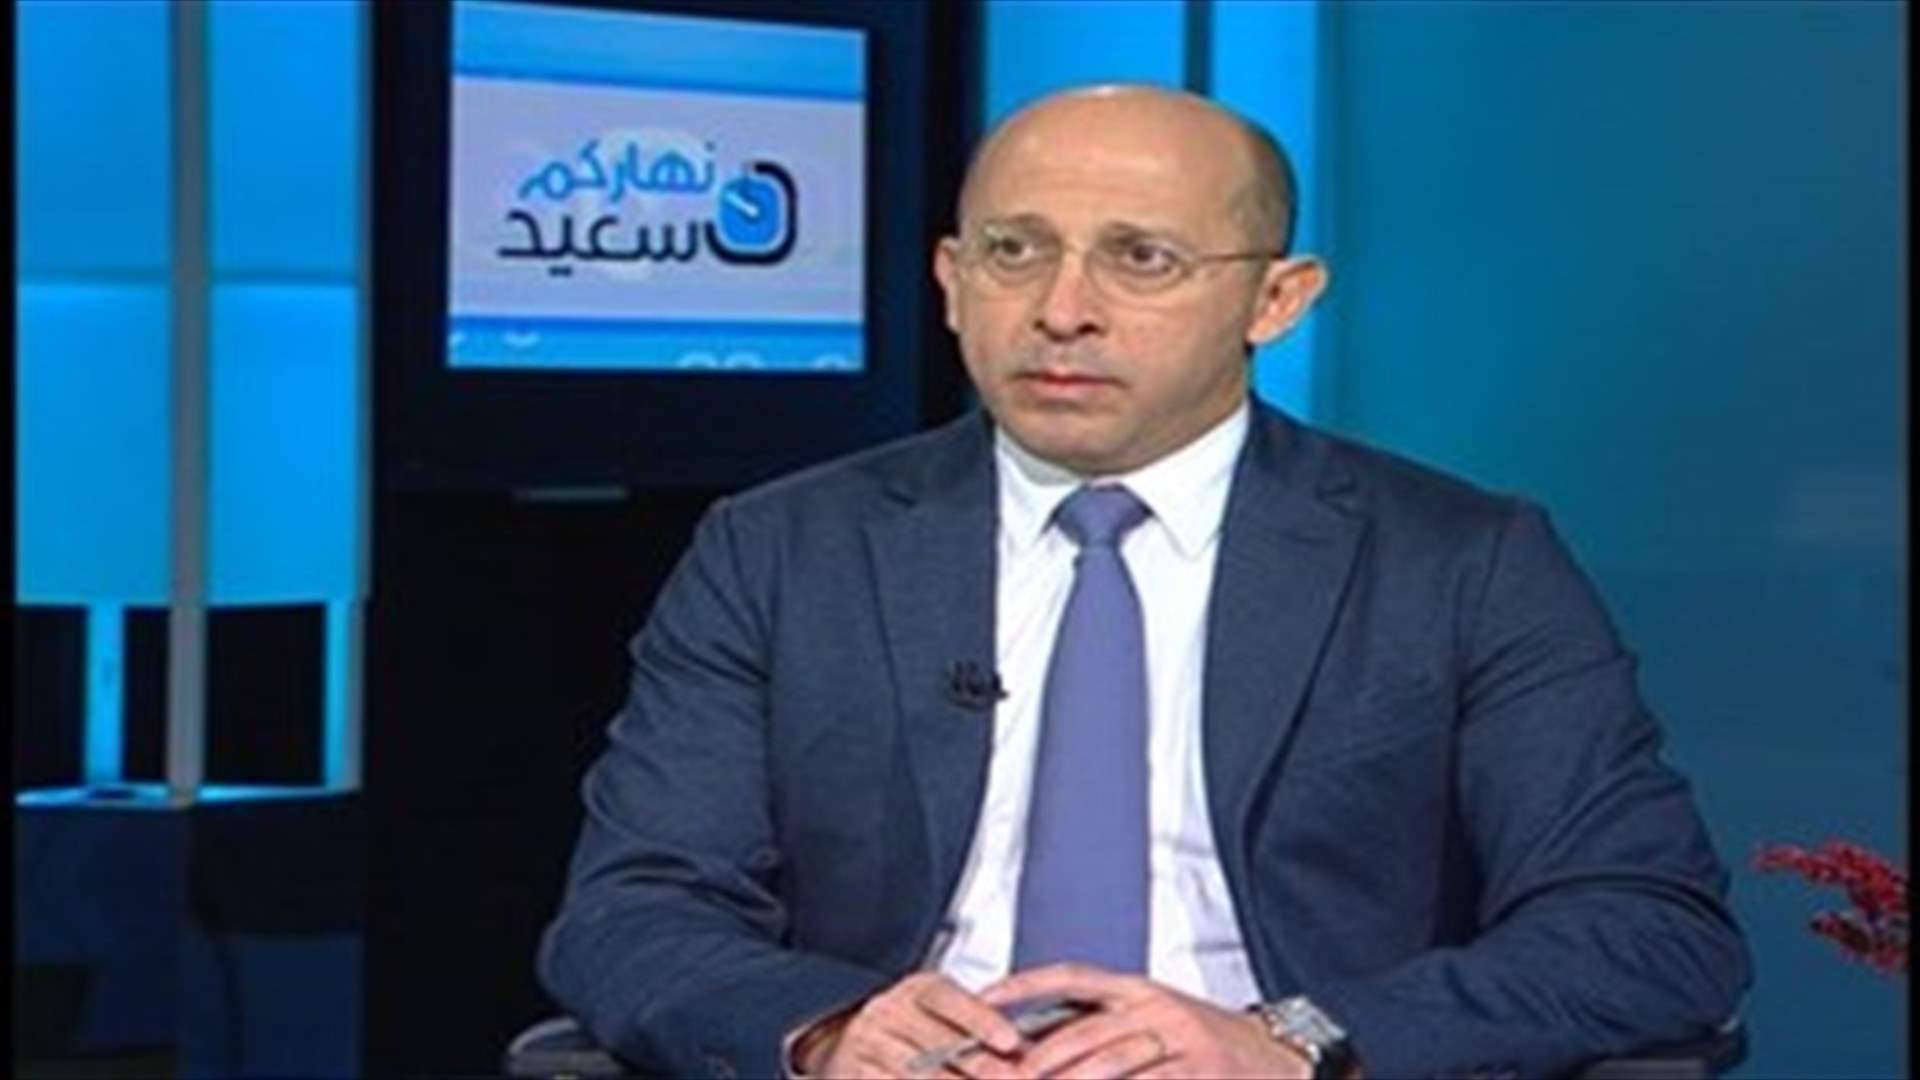 MP Aoun: There are some constant alliances that will not change with Hezbollah